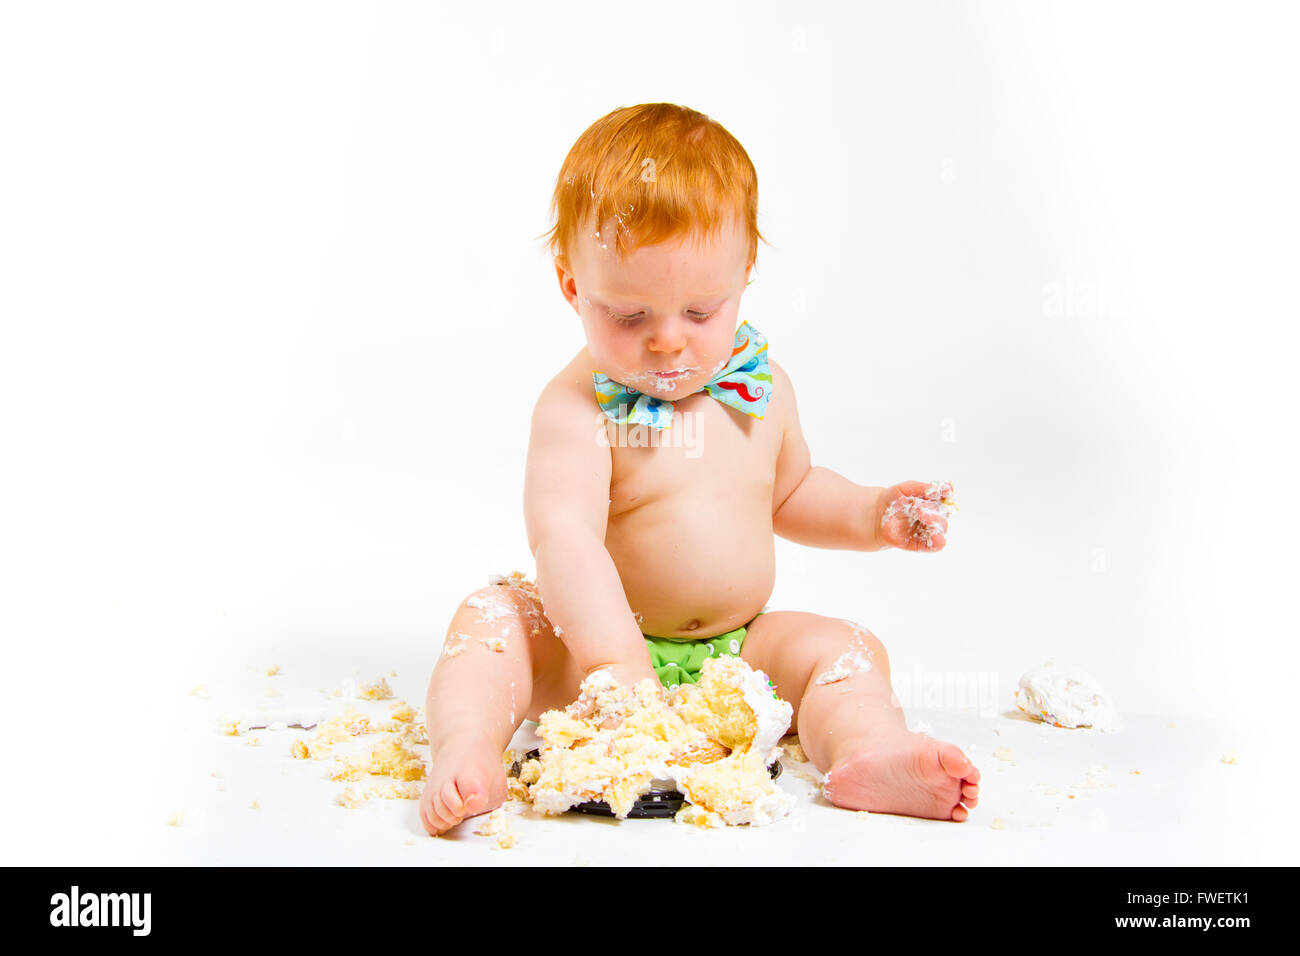 A baby boy gets to eat cake for the first time on his first birthday in this cake smash in studio against a white background. Stock Photo